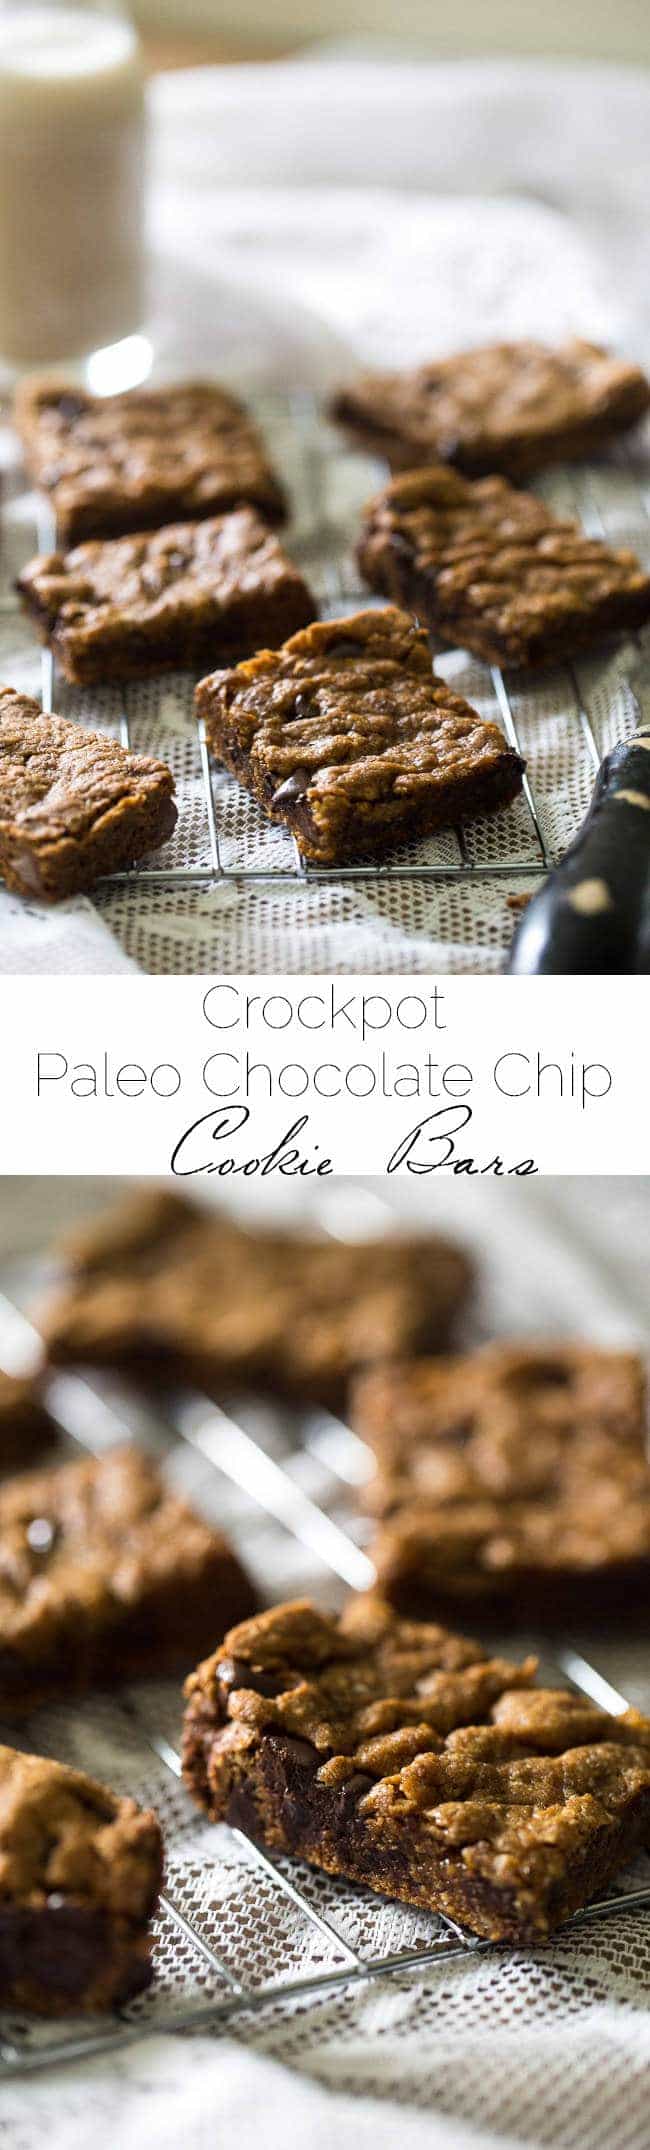 Crock Pot Paleo Cookies with Chocolate Chips – Let the crock pot do the work for you with these cookies that are loaded with gooey chocolate! An easy, healthy, grain-free treat! | Foodfaithfitness.com | @FoodFaithFit